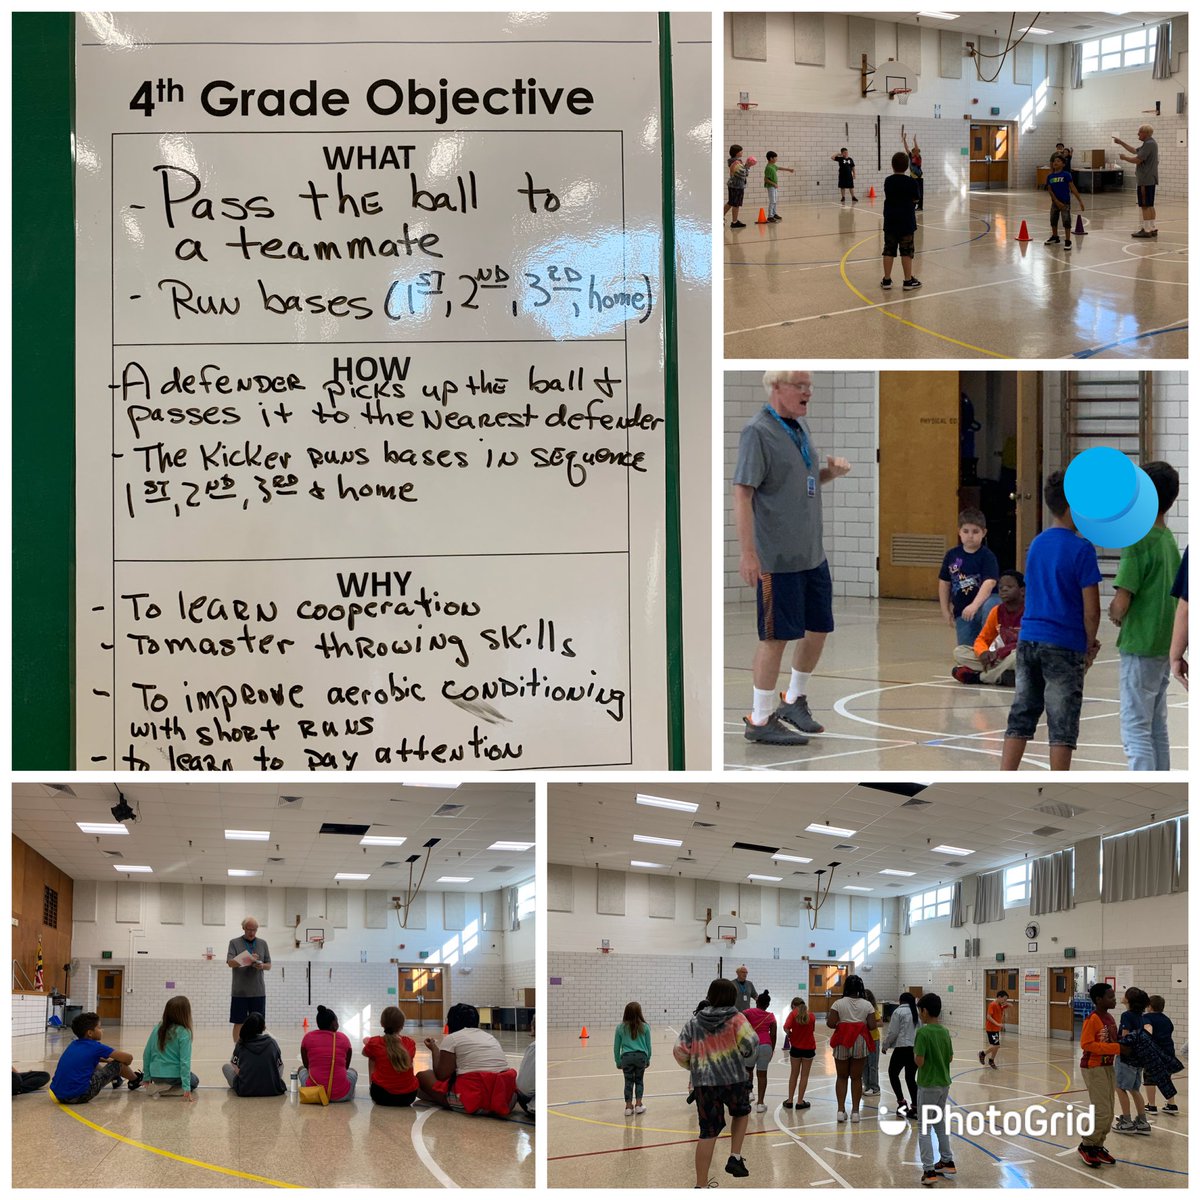 Kickoff to PE Coaching Cycle with Mr. U & 4th Ss starting off strong with establishing routines to support effective instruction. ✅ Roll Call ✅ Warm-Up ✅ Unpack Objective ✅ Demo ✅ Guided Practice @kristi_enriquez @AMGlinowiecki